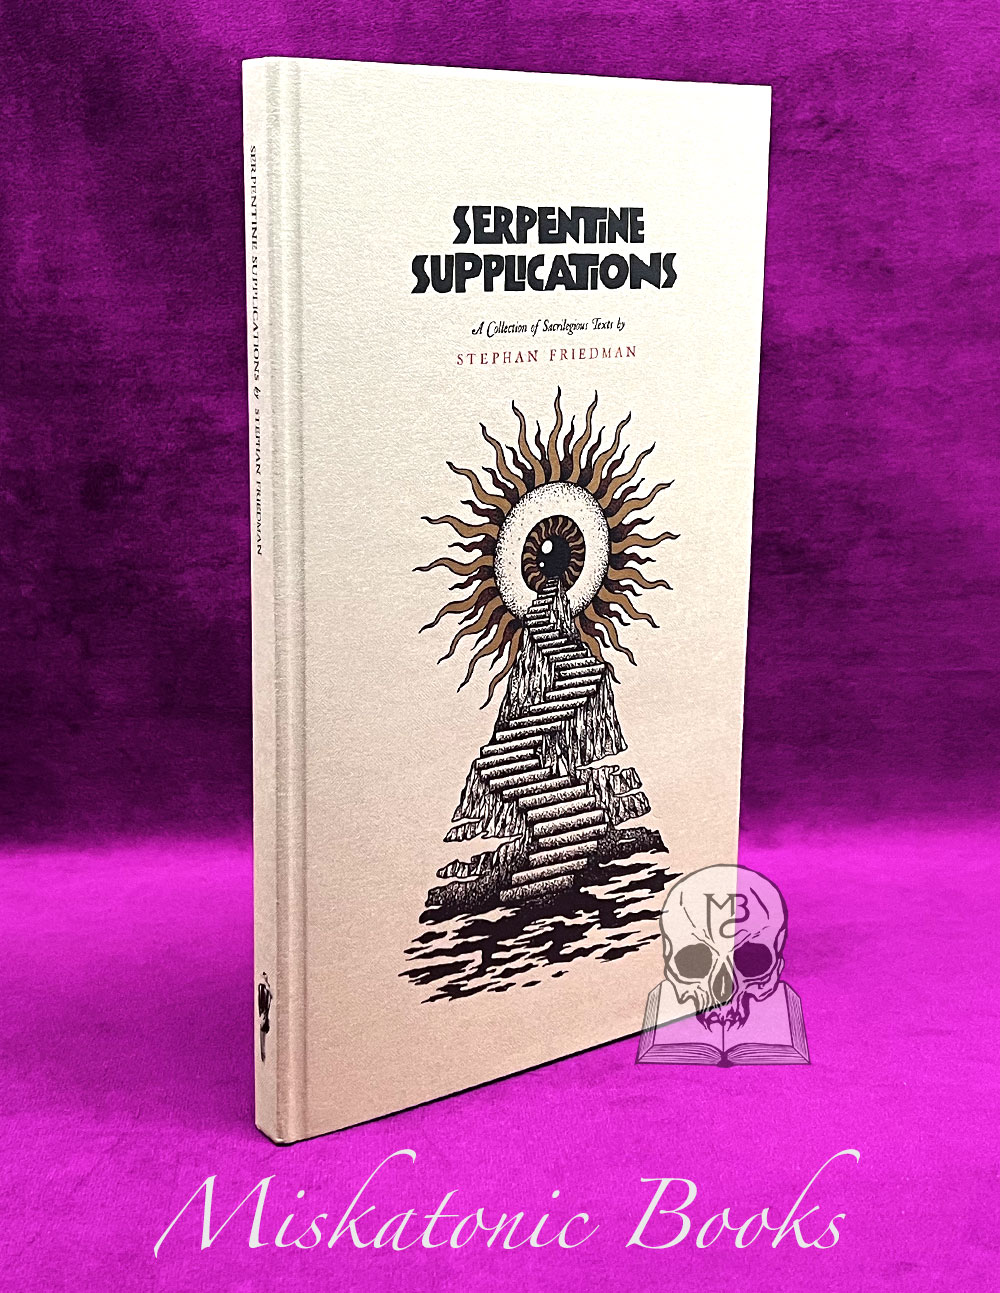 SERPENTINE SUPPLICATIONS: A Collection of Sacrilegious Text by Stephan Friedman